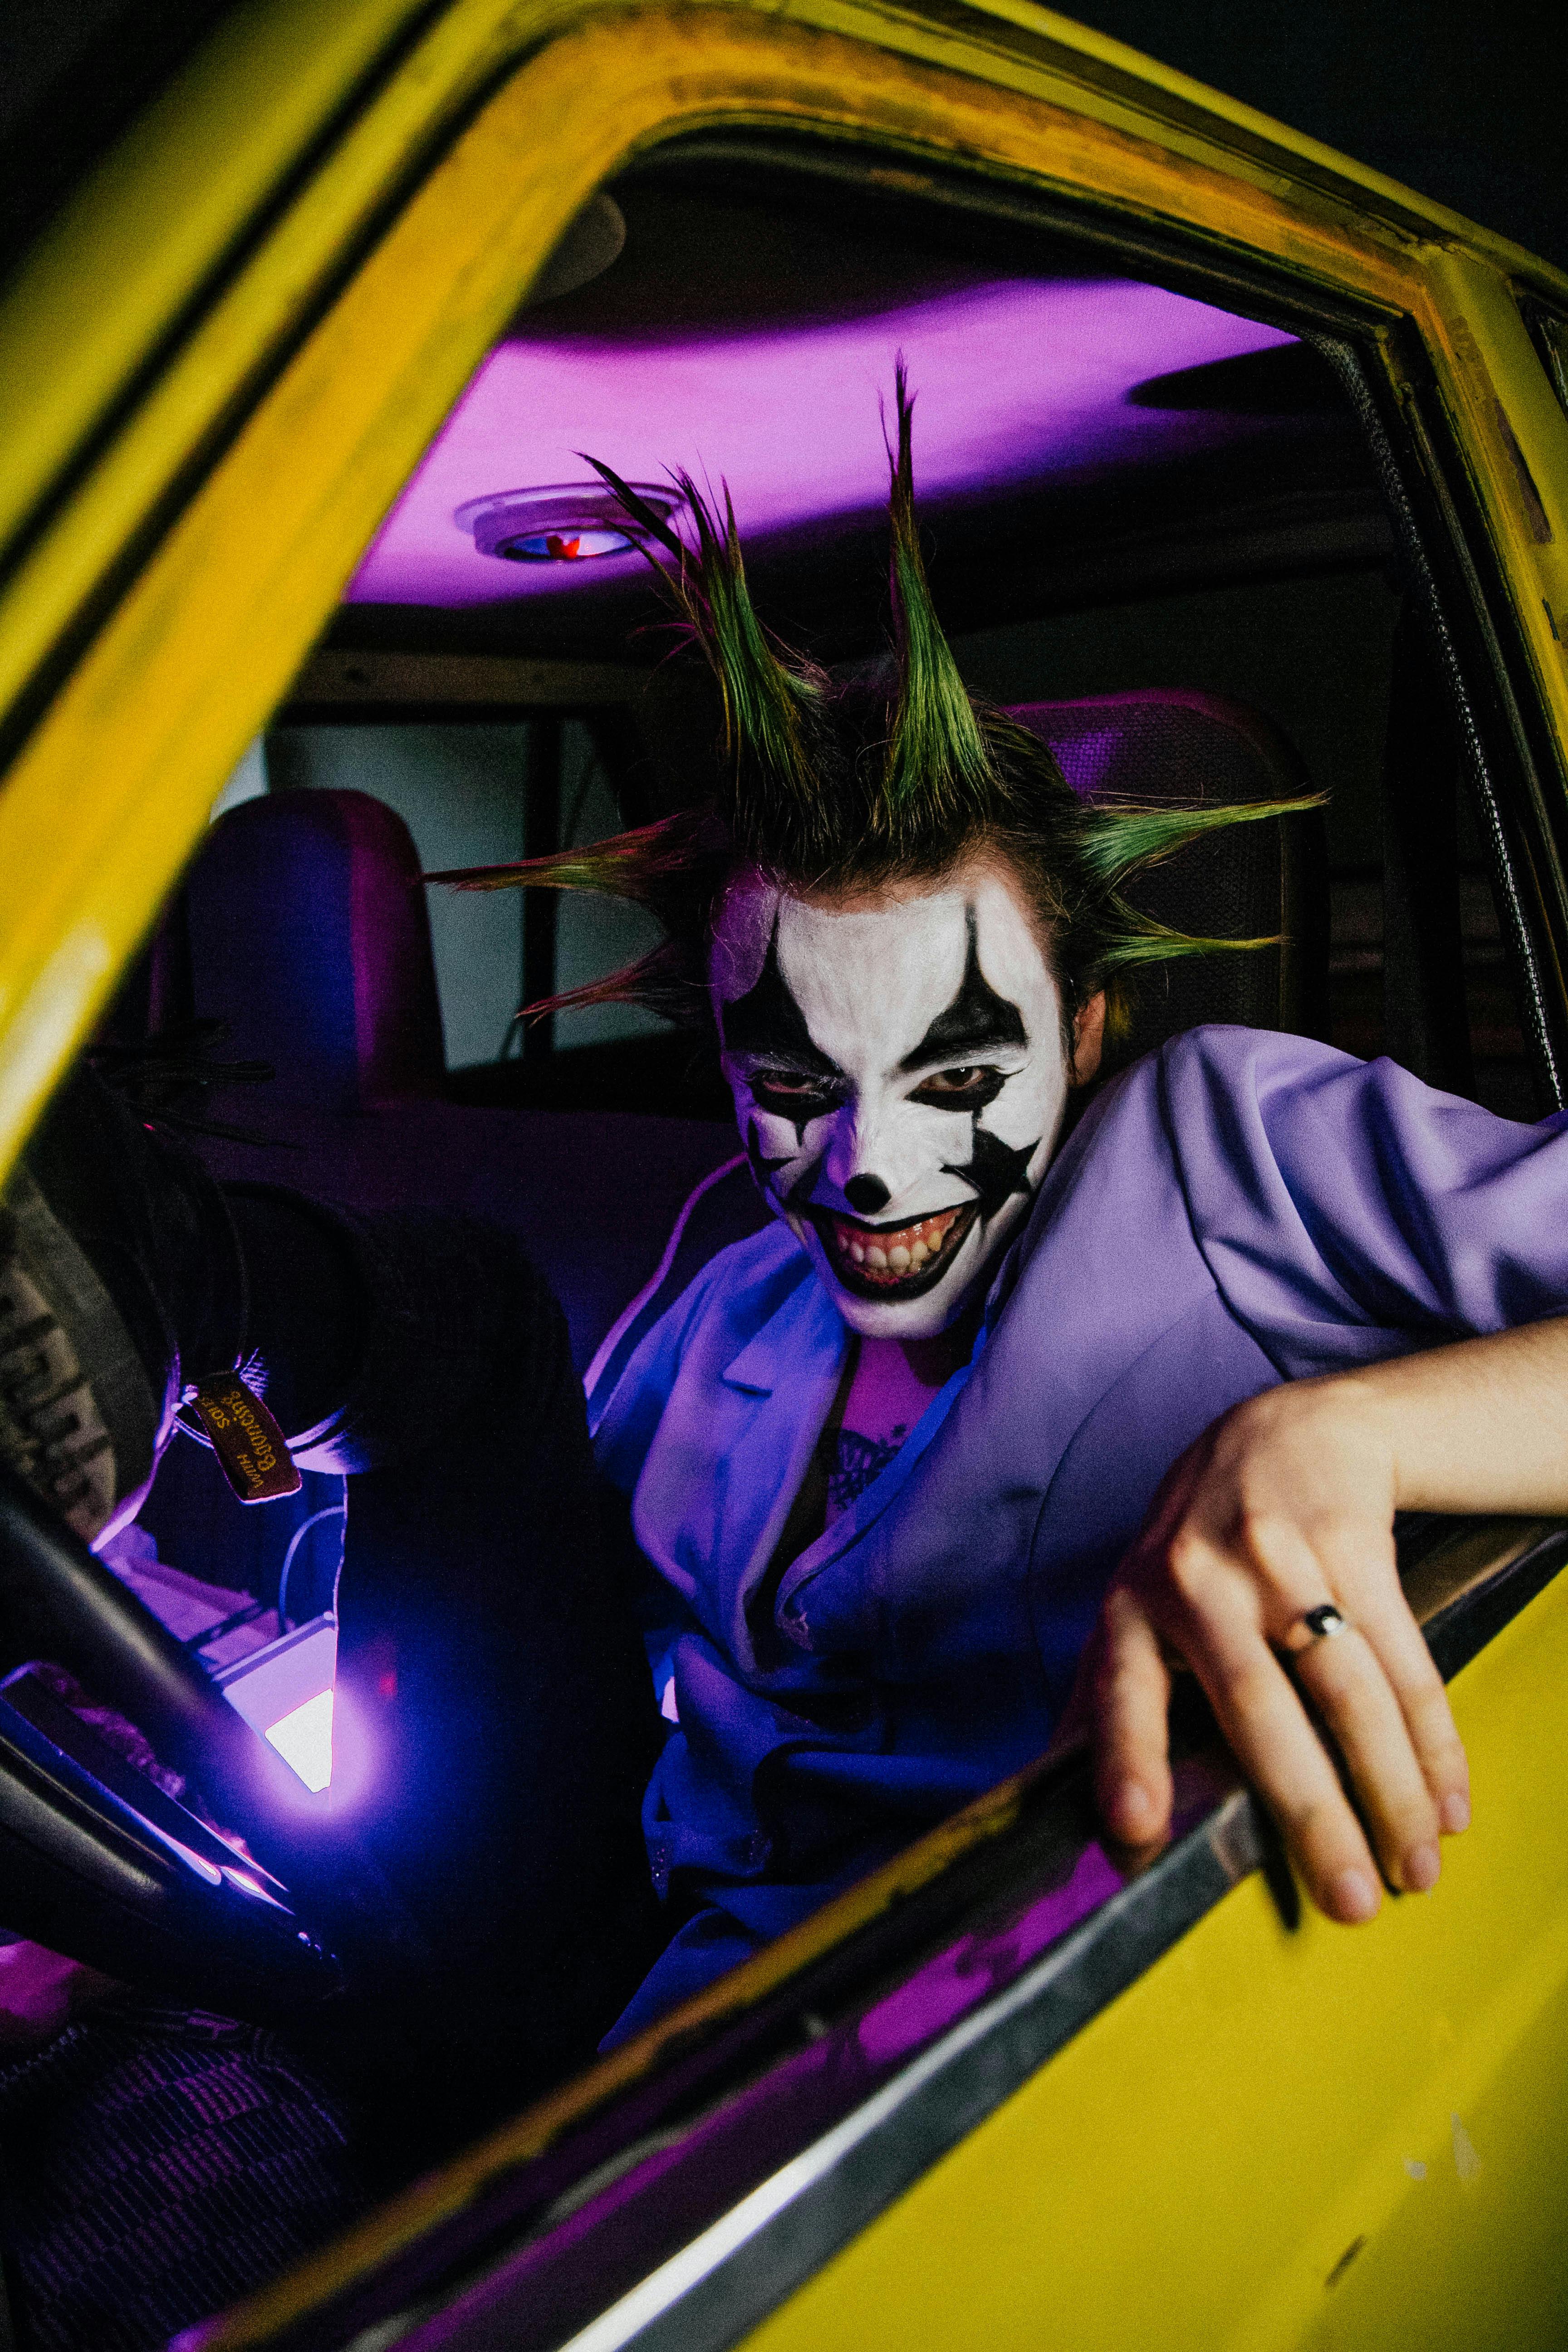 The Joker HD Wallpaper for Android